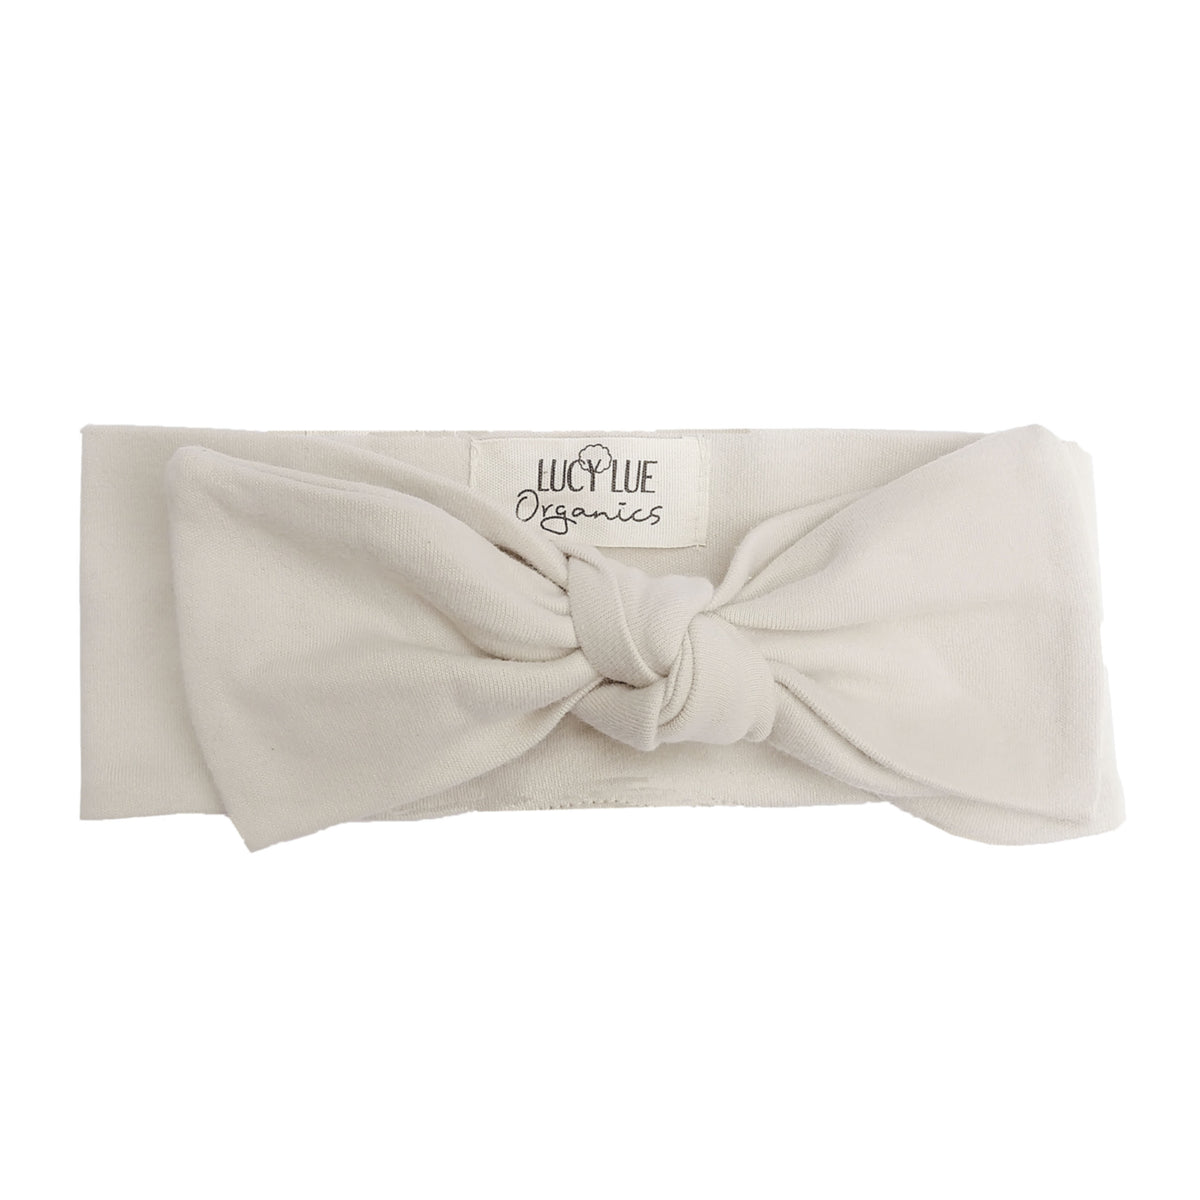 Baby top knot bow by Lucy Lue Organics. Baby girl hair bow. Organic baby clothes, organic toddler clothes, organic cotton, organic baby, eco friendly clothing, fair trade clothing, baby clothes, modern organic baby clothes, baby boy clothes, baby girl clothes, unisex baby clothes. 